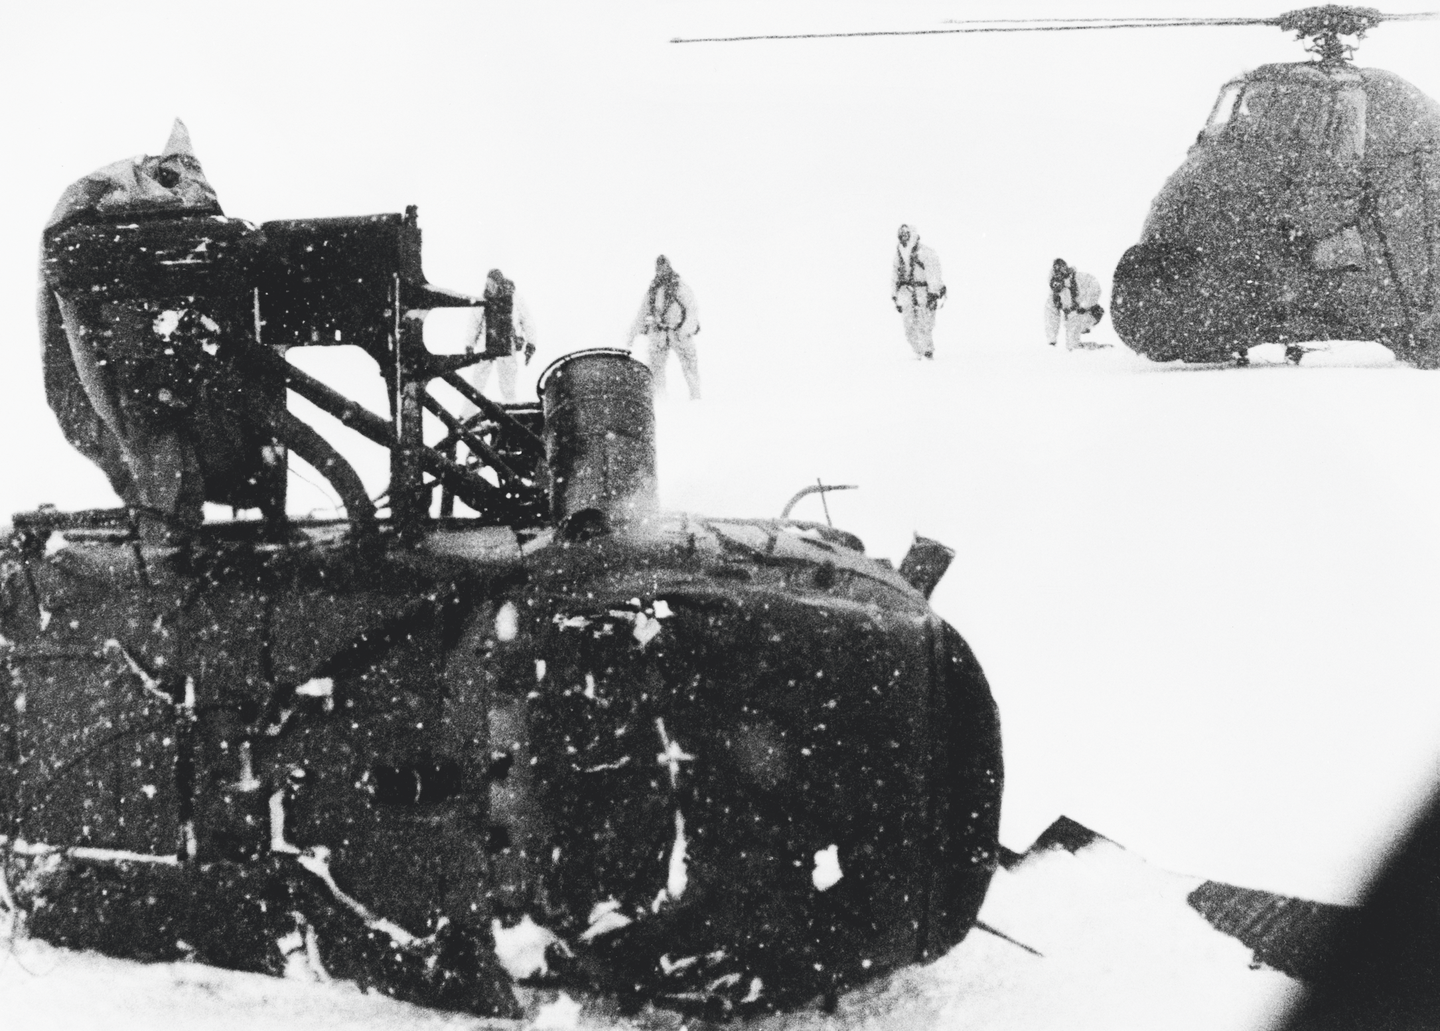 The first Wessex Mk 5 helicopter to crash on Fortuna Glacier during an Antarctic blizzard. Splash is one of the soldiers seen approaching. <em>Imperial War Museum via publisher</em>